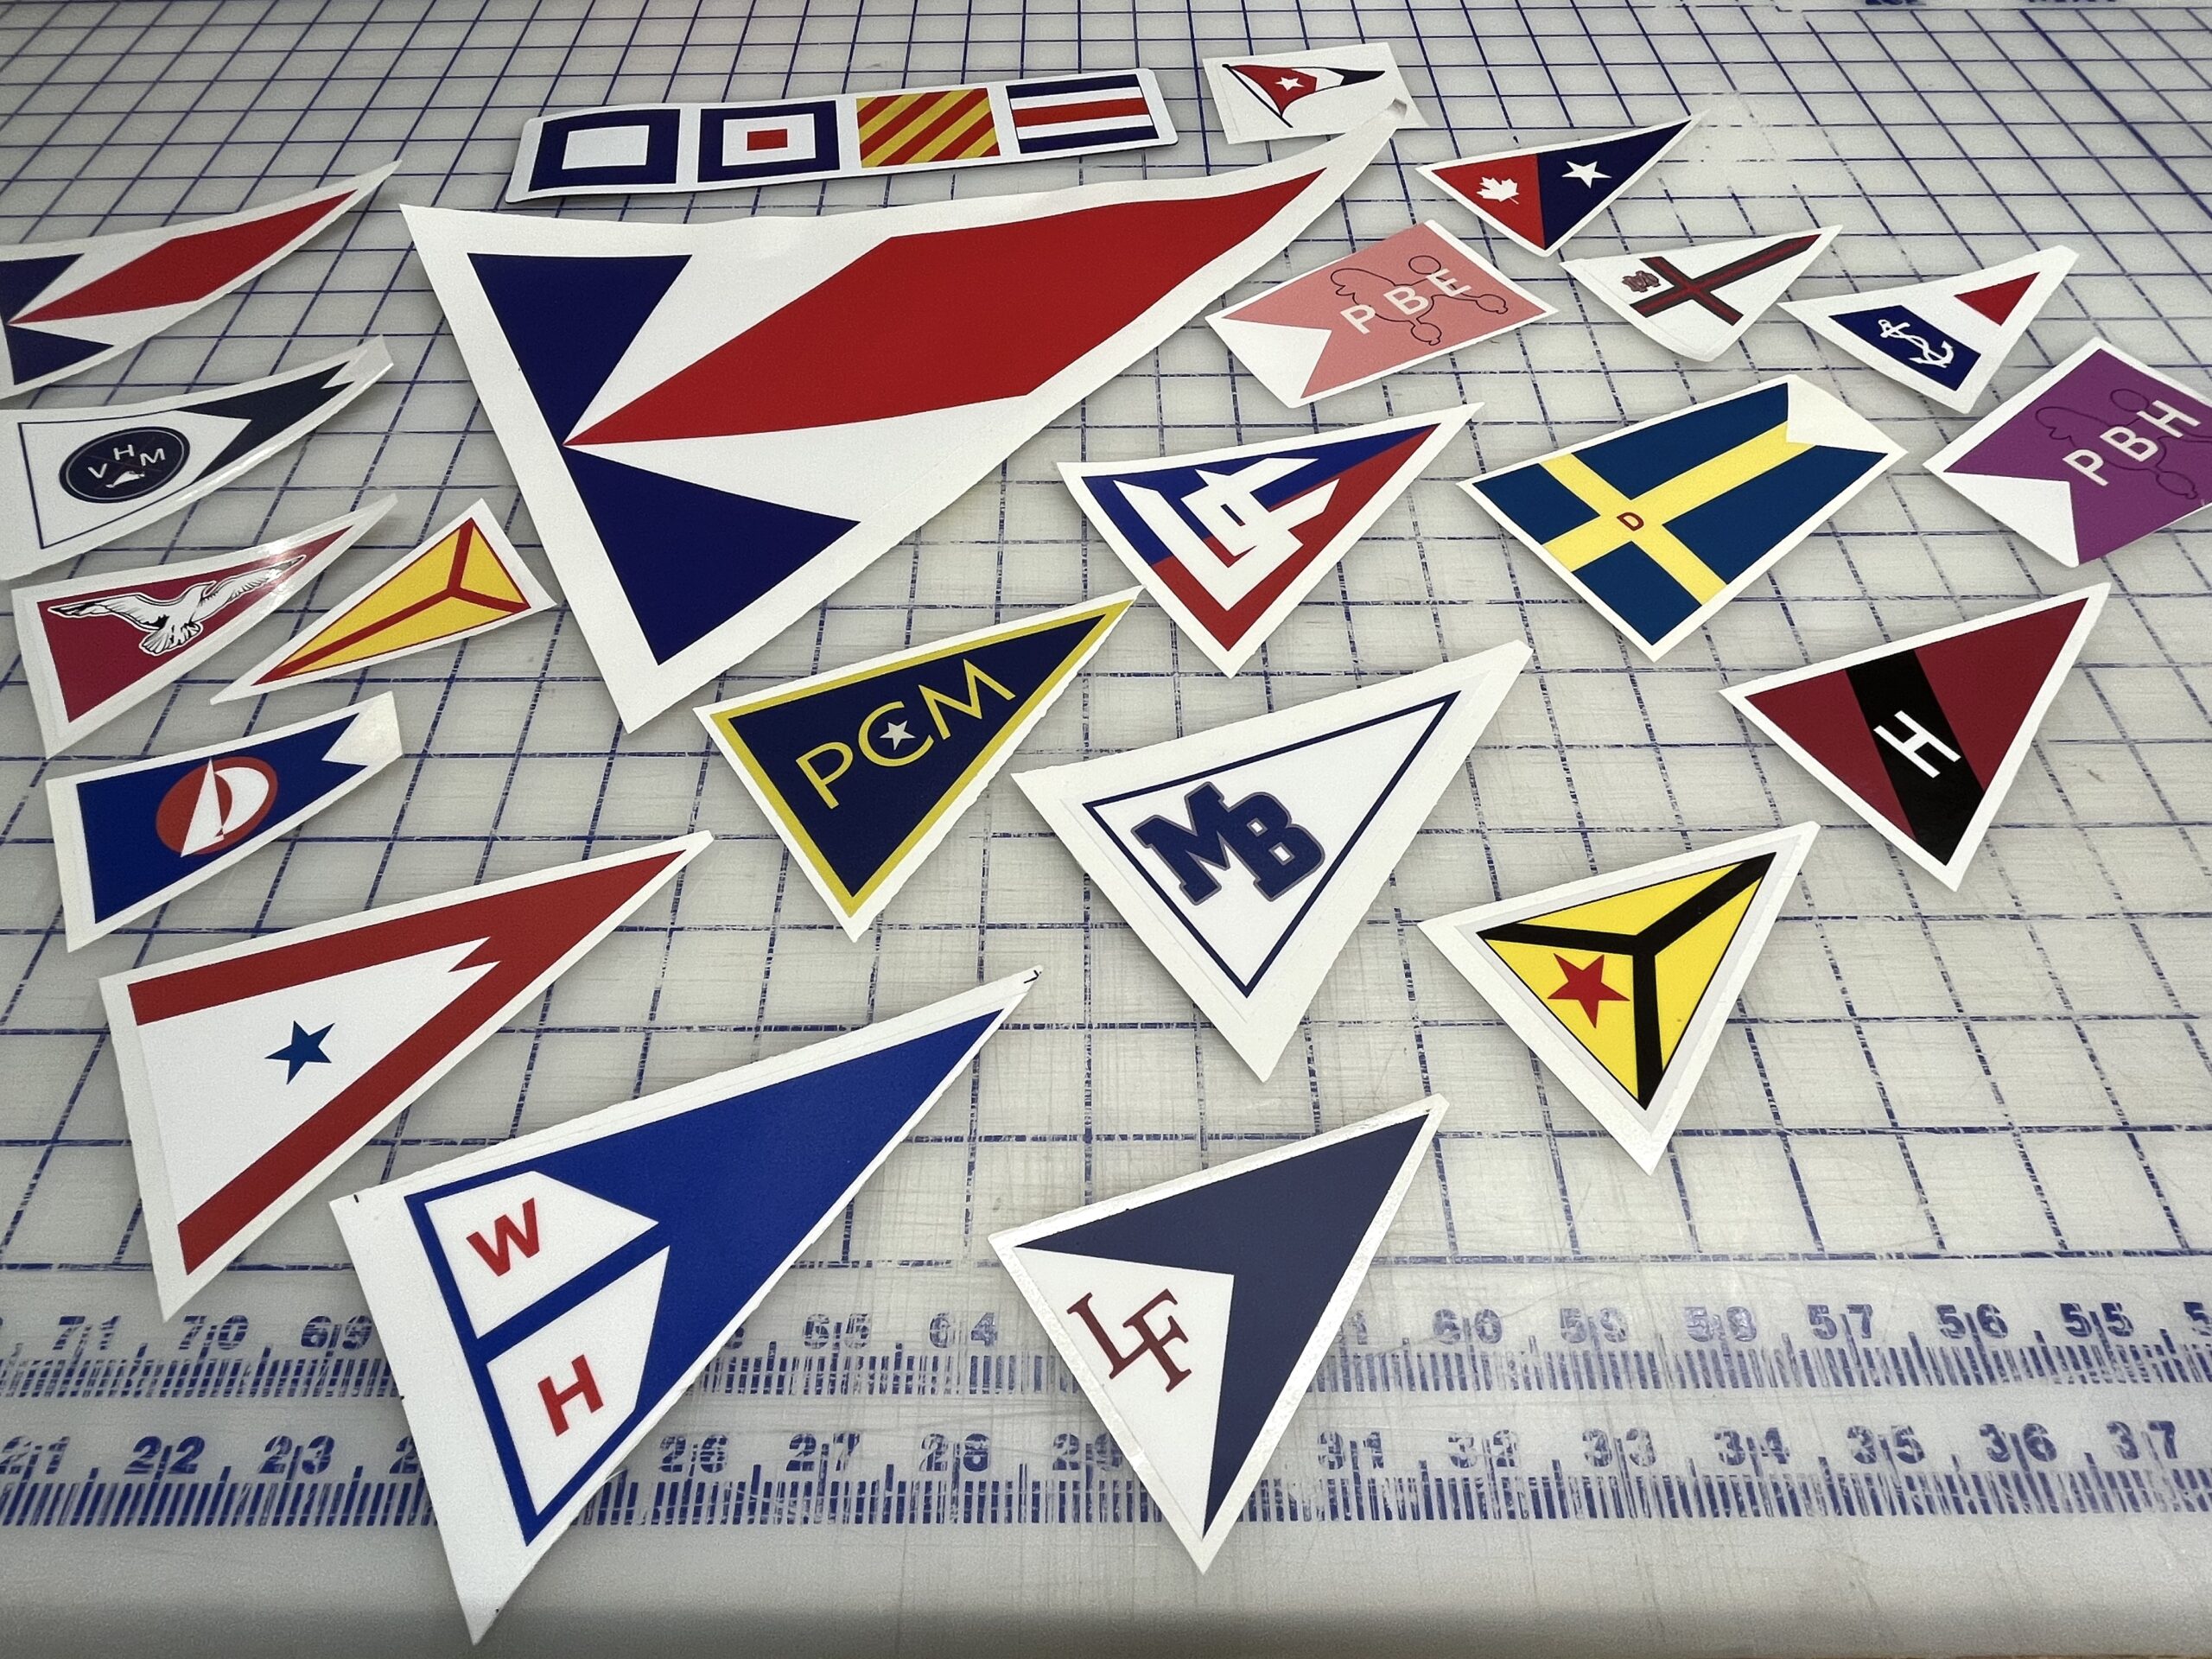 Club Logo Stickers and Magnets